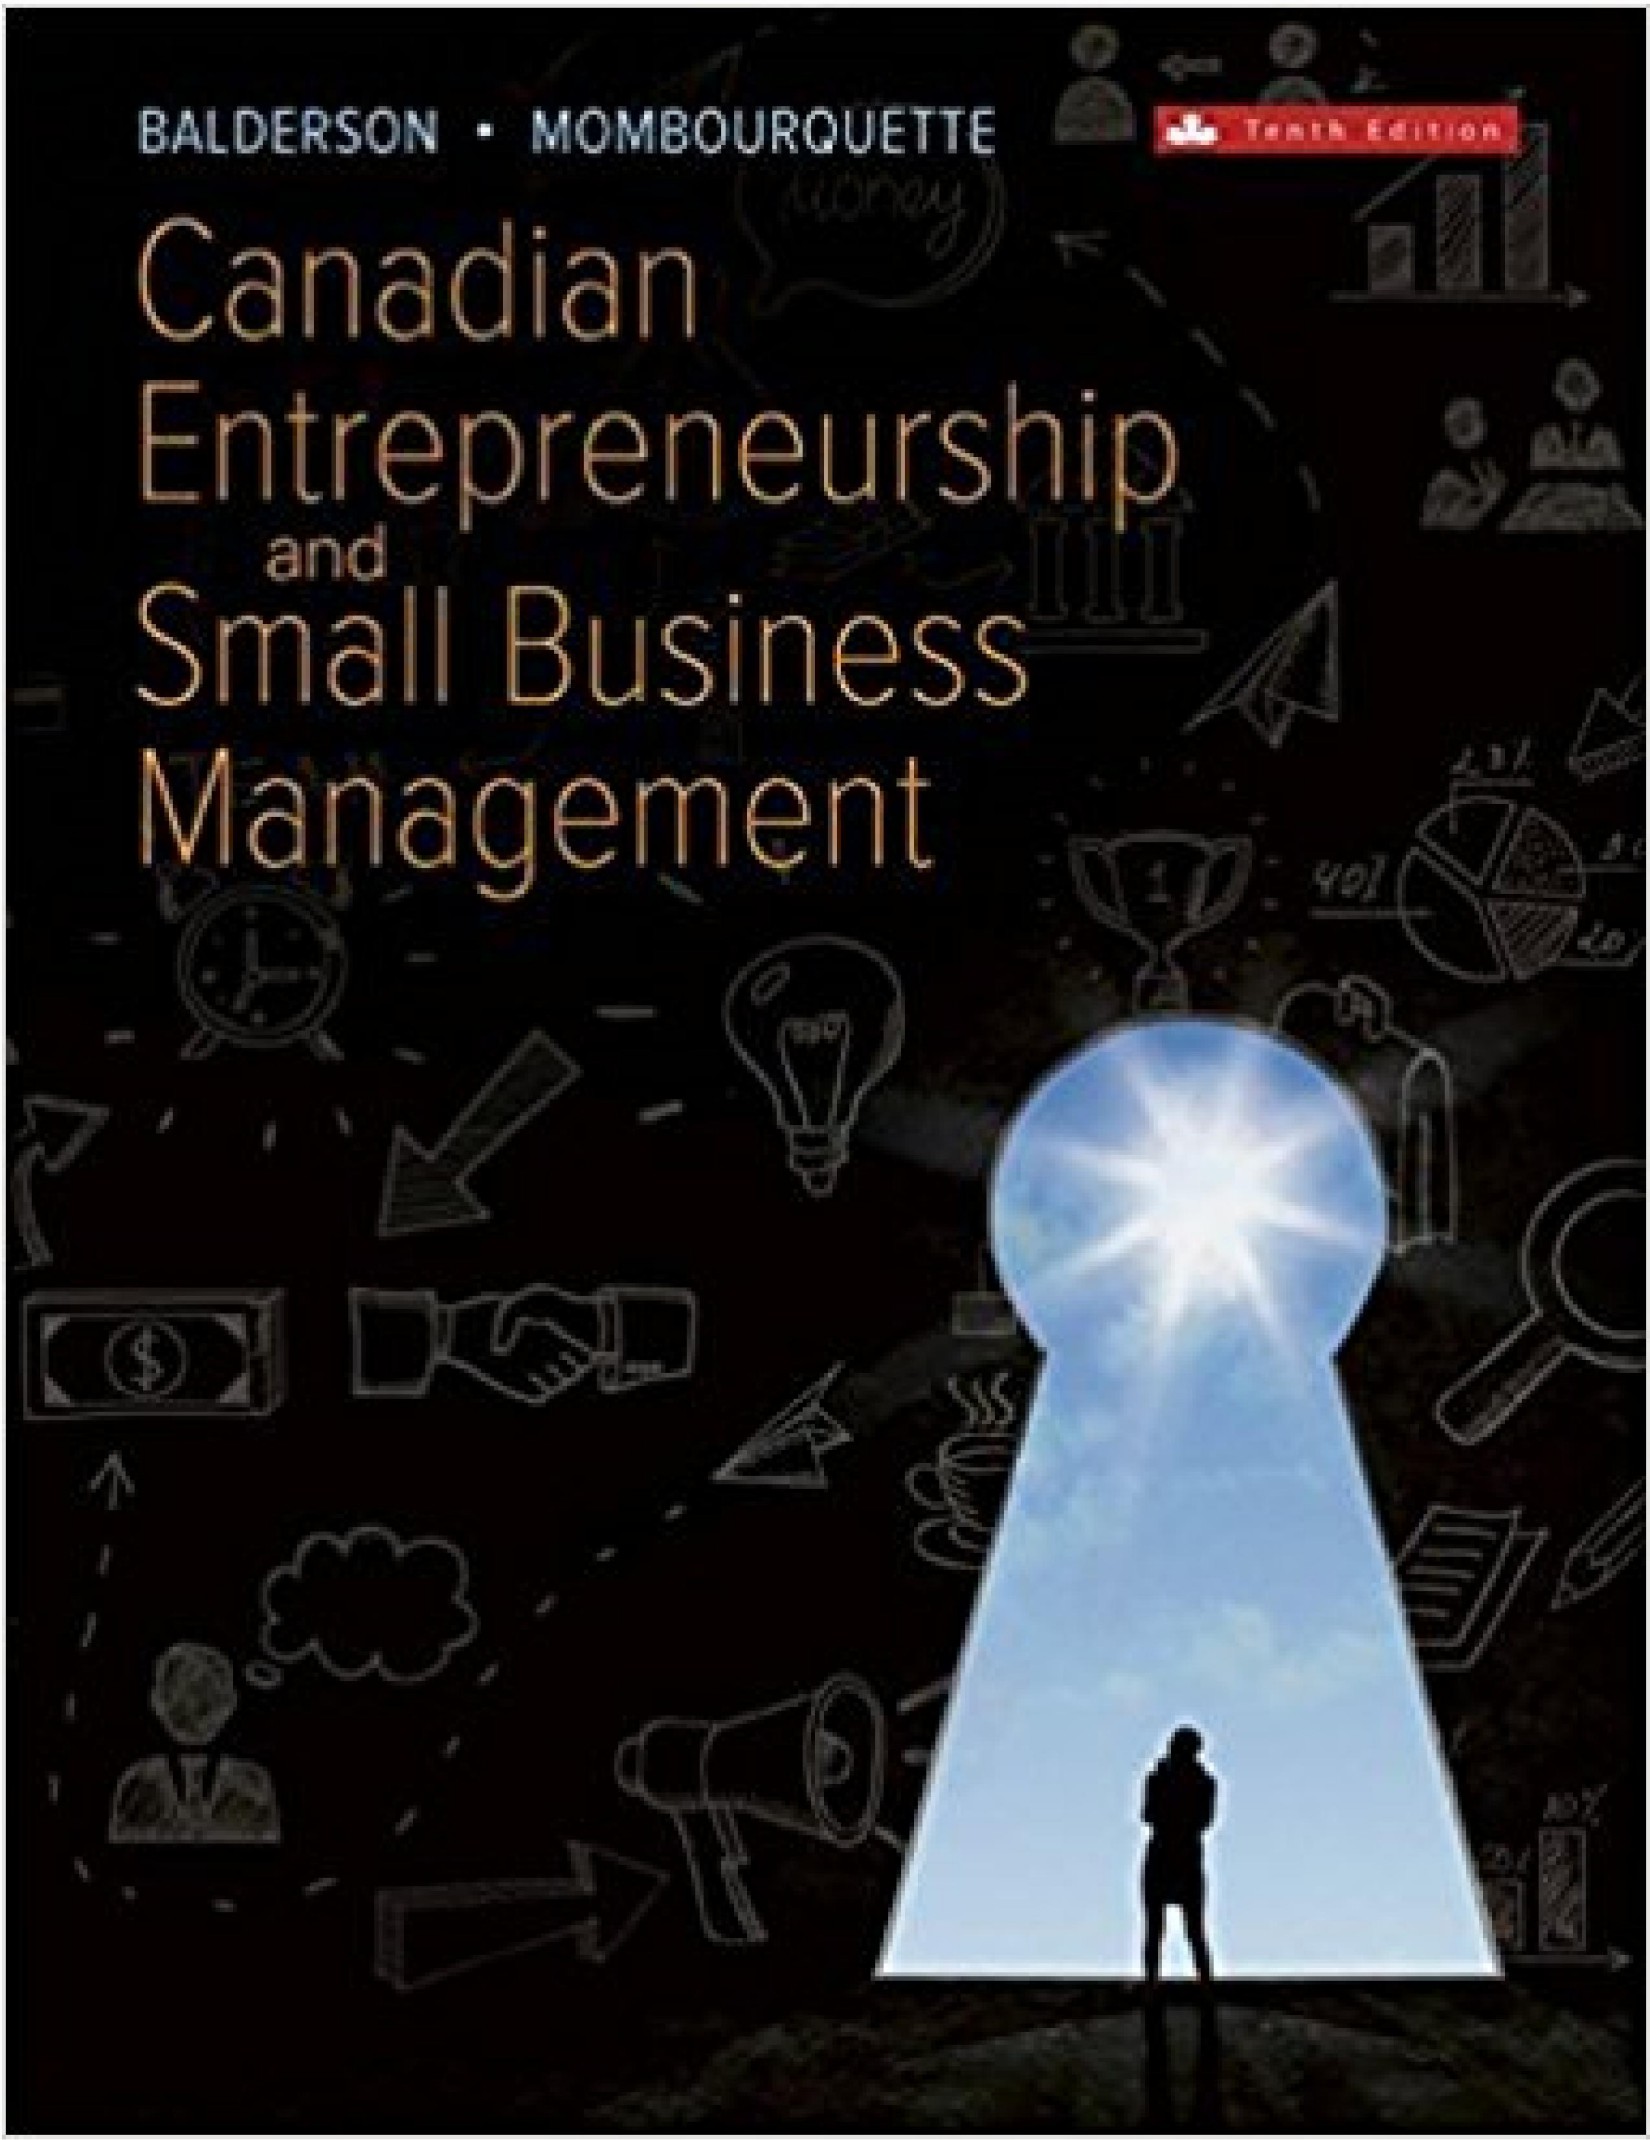 Canadian Entrepreneurship and Small Business Management 10th Editionby Wesley Balderson-Wei Zhi.jpg